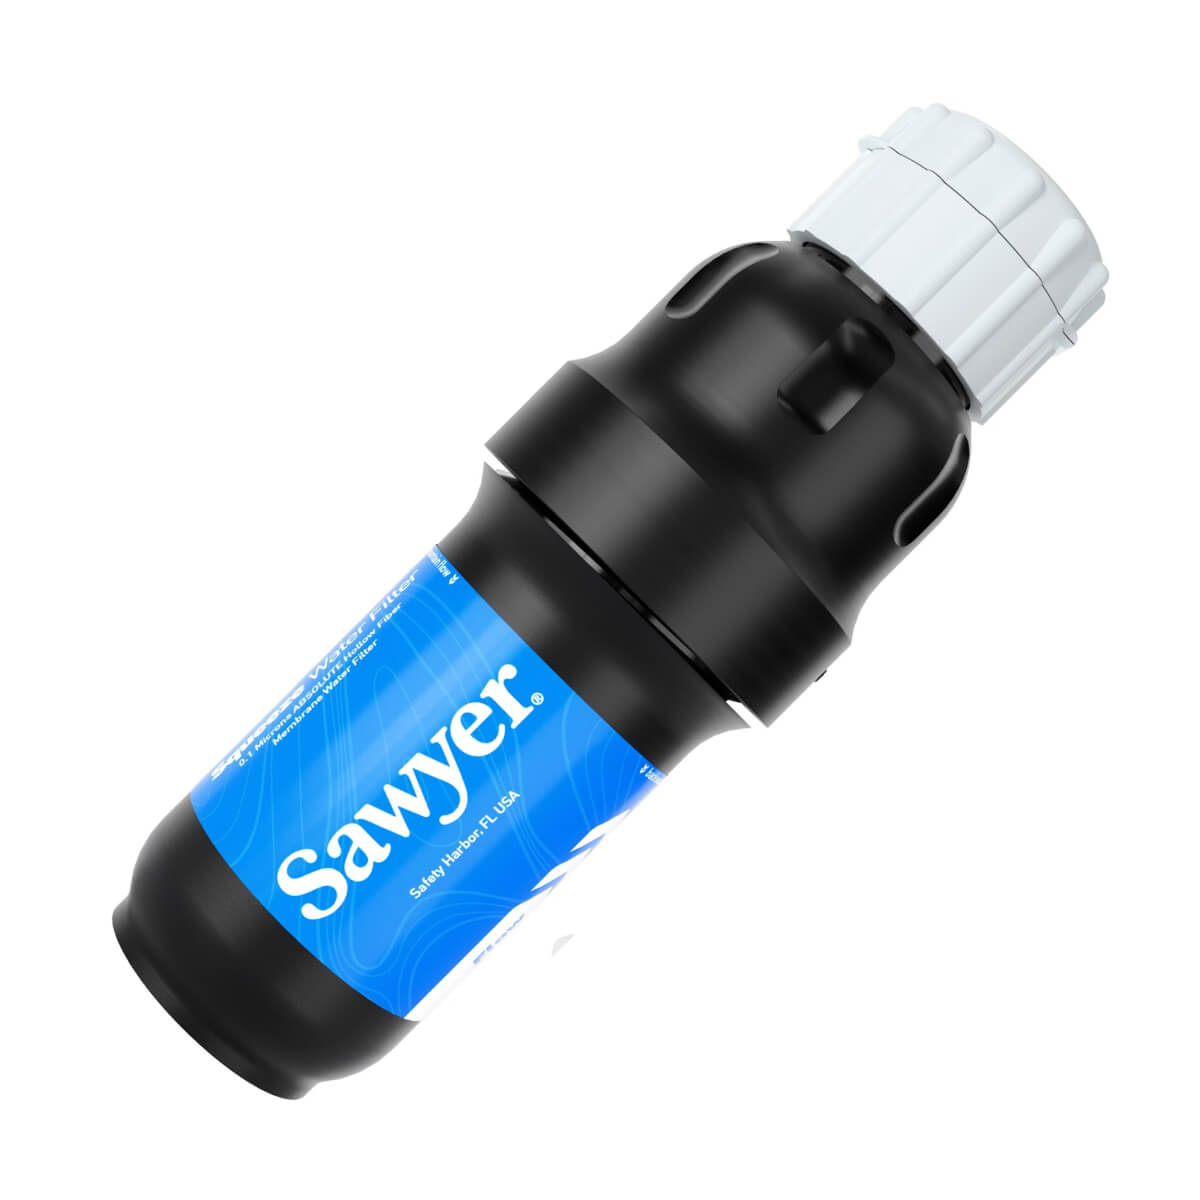 Sawyer Squeeze backpacking water filter